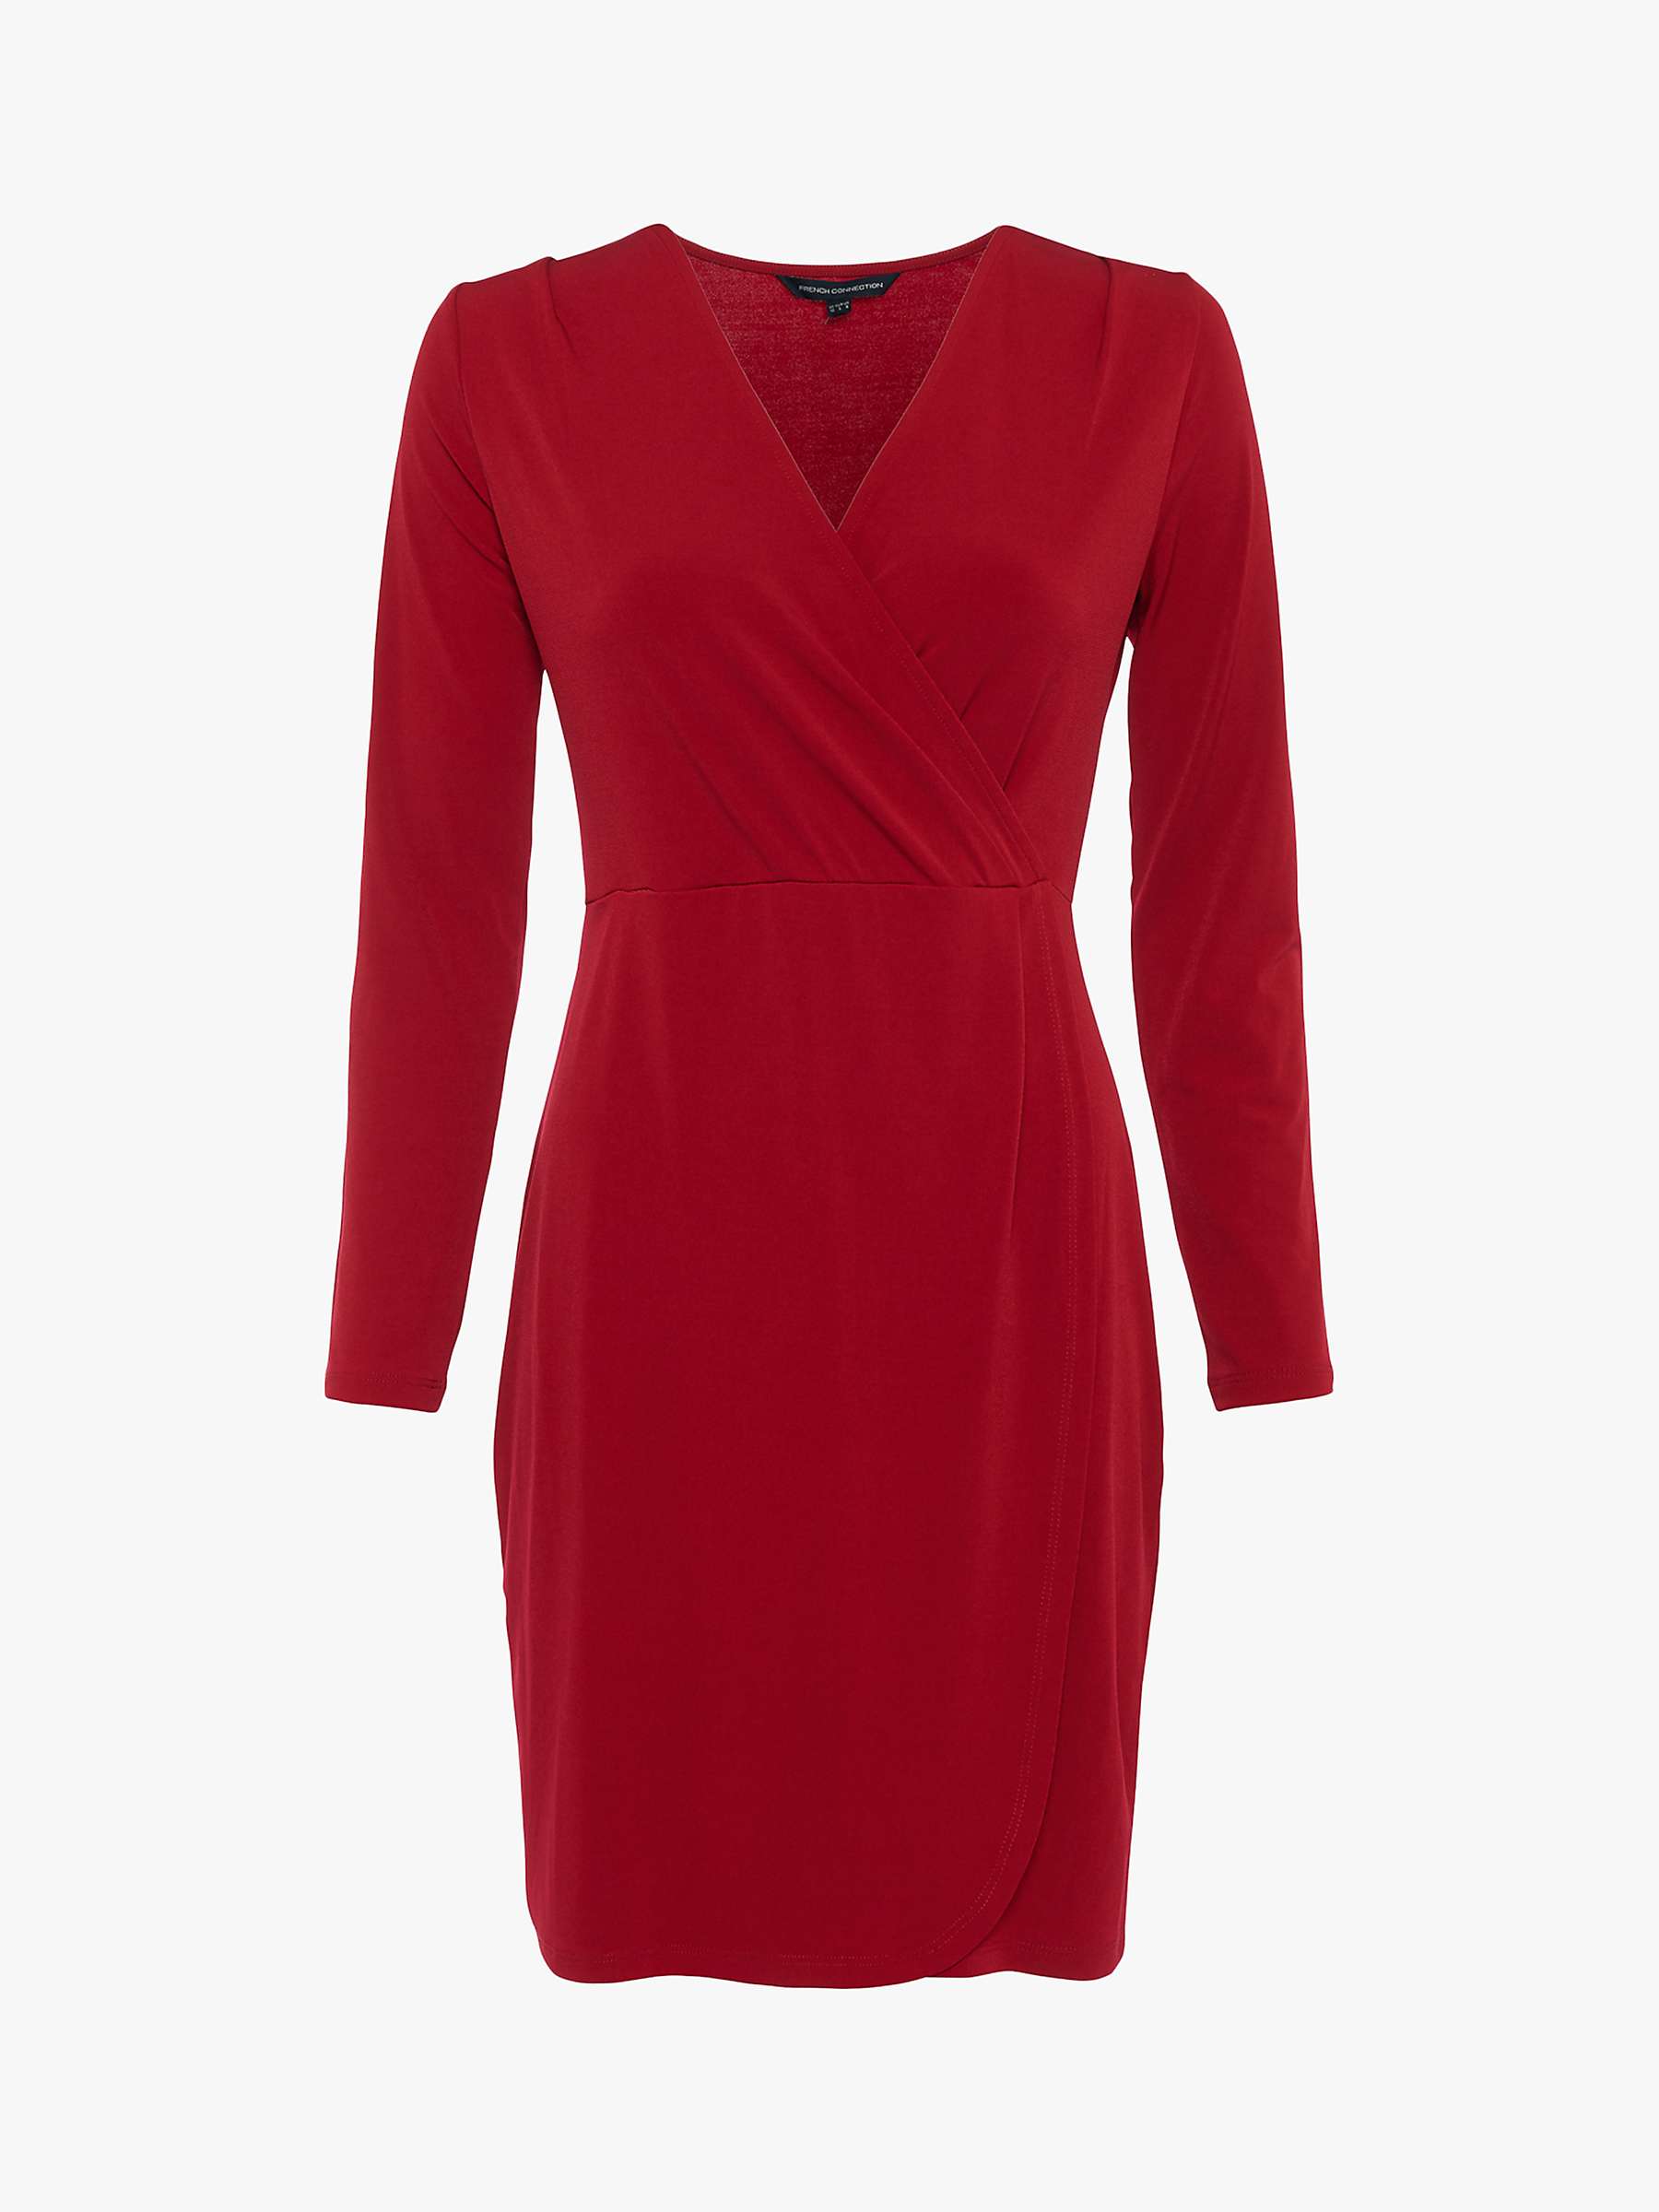 Buy French Connection Slinky Long Sleeve Wrap Dress Online at johnlewis.com